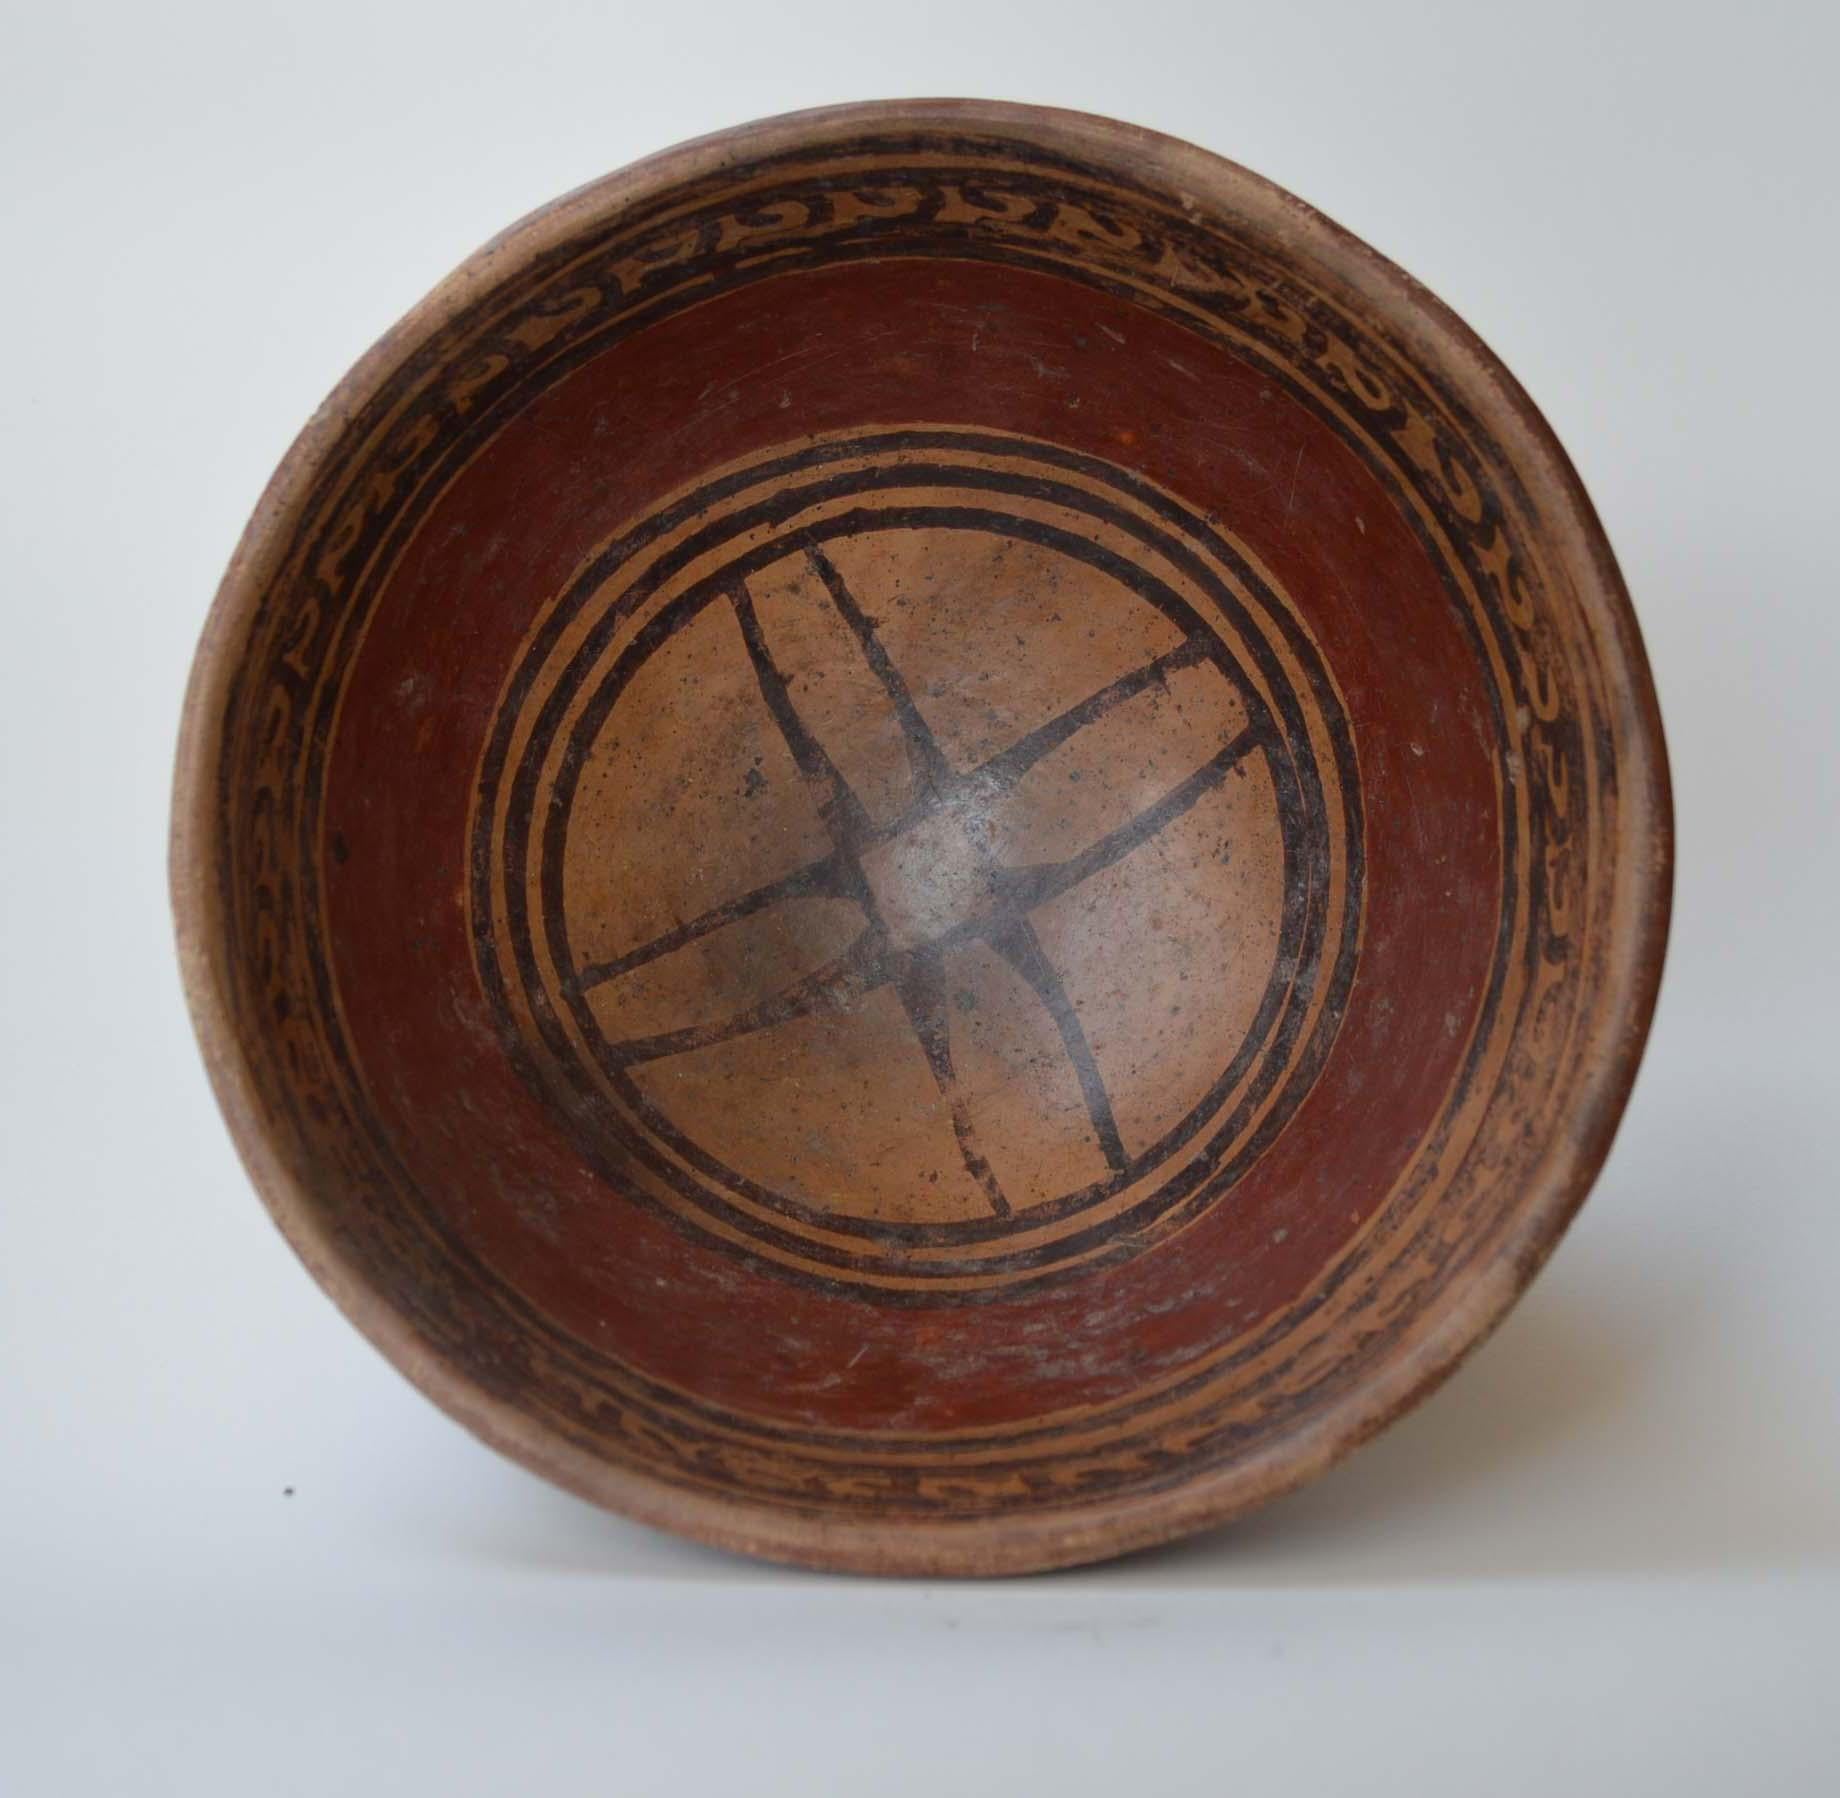 PRE COLUMBIAN ANCIENT SOUTH AMERICAN FINE NARINO CARCHI PAINTED BOWL CIRCA 1100-1400 COLOMBIA  ECUADOR
A FINE CARCHI/NARINO BOWL FROM THE BORDER REGIONS OF  ECUADOR COLOMBIA
THE INTERIOR PAINTED WITH LINNEAR  PATTERN 
MINOR RESTORATION ON UNDERSIDE